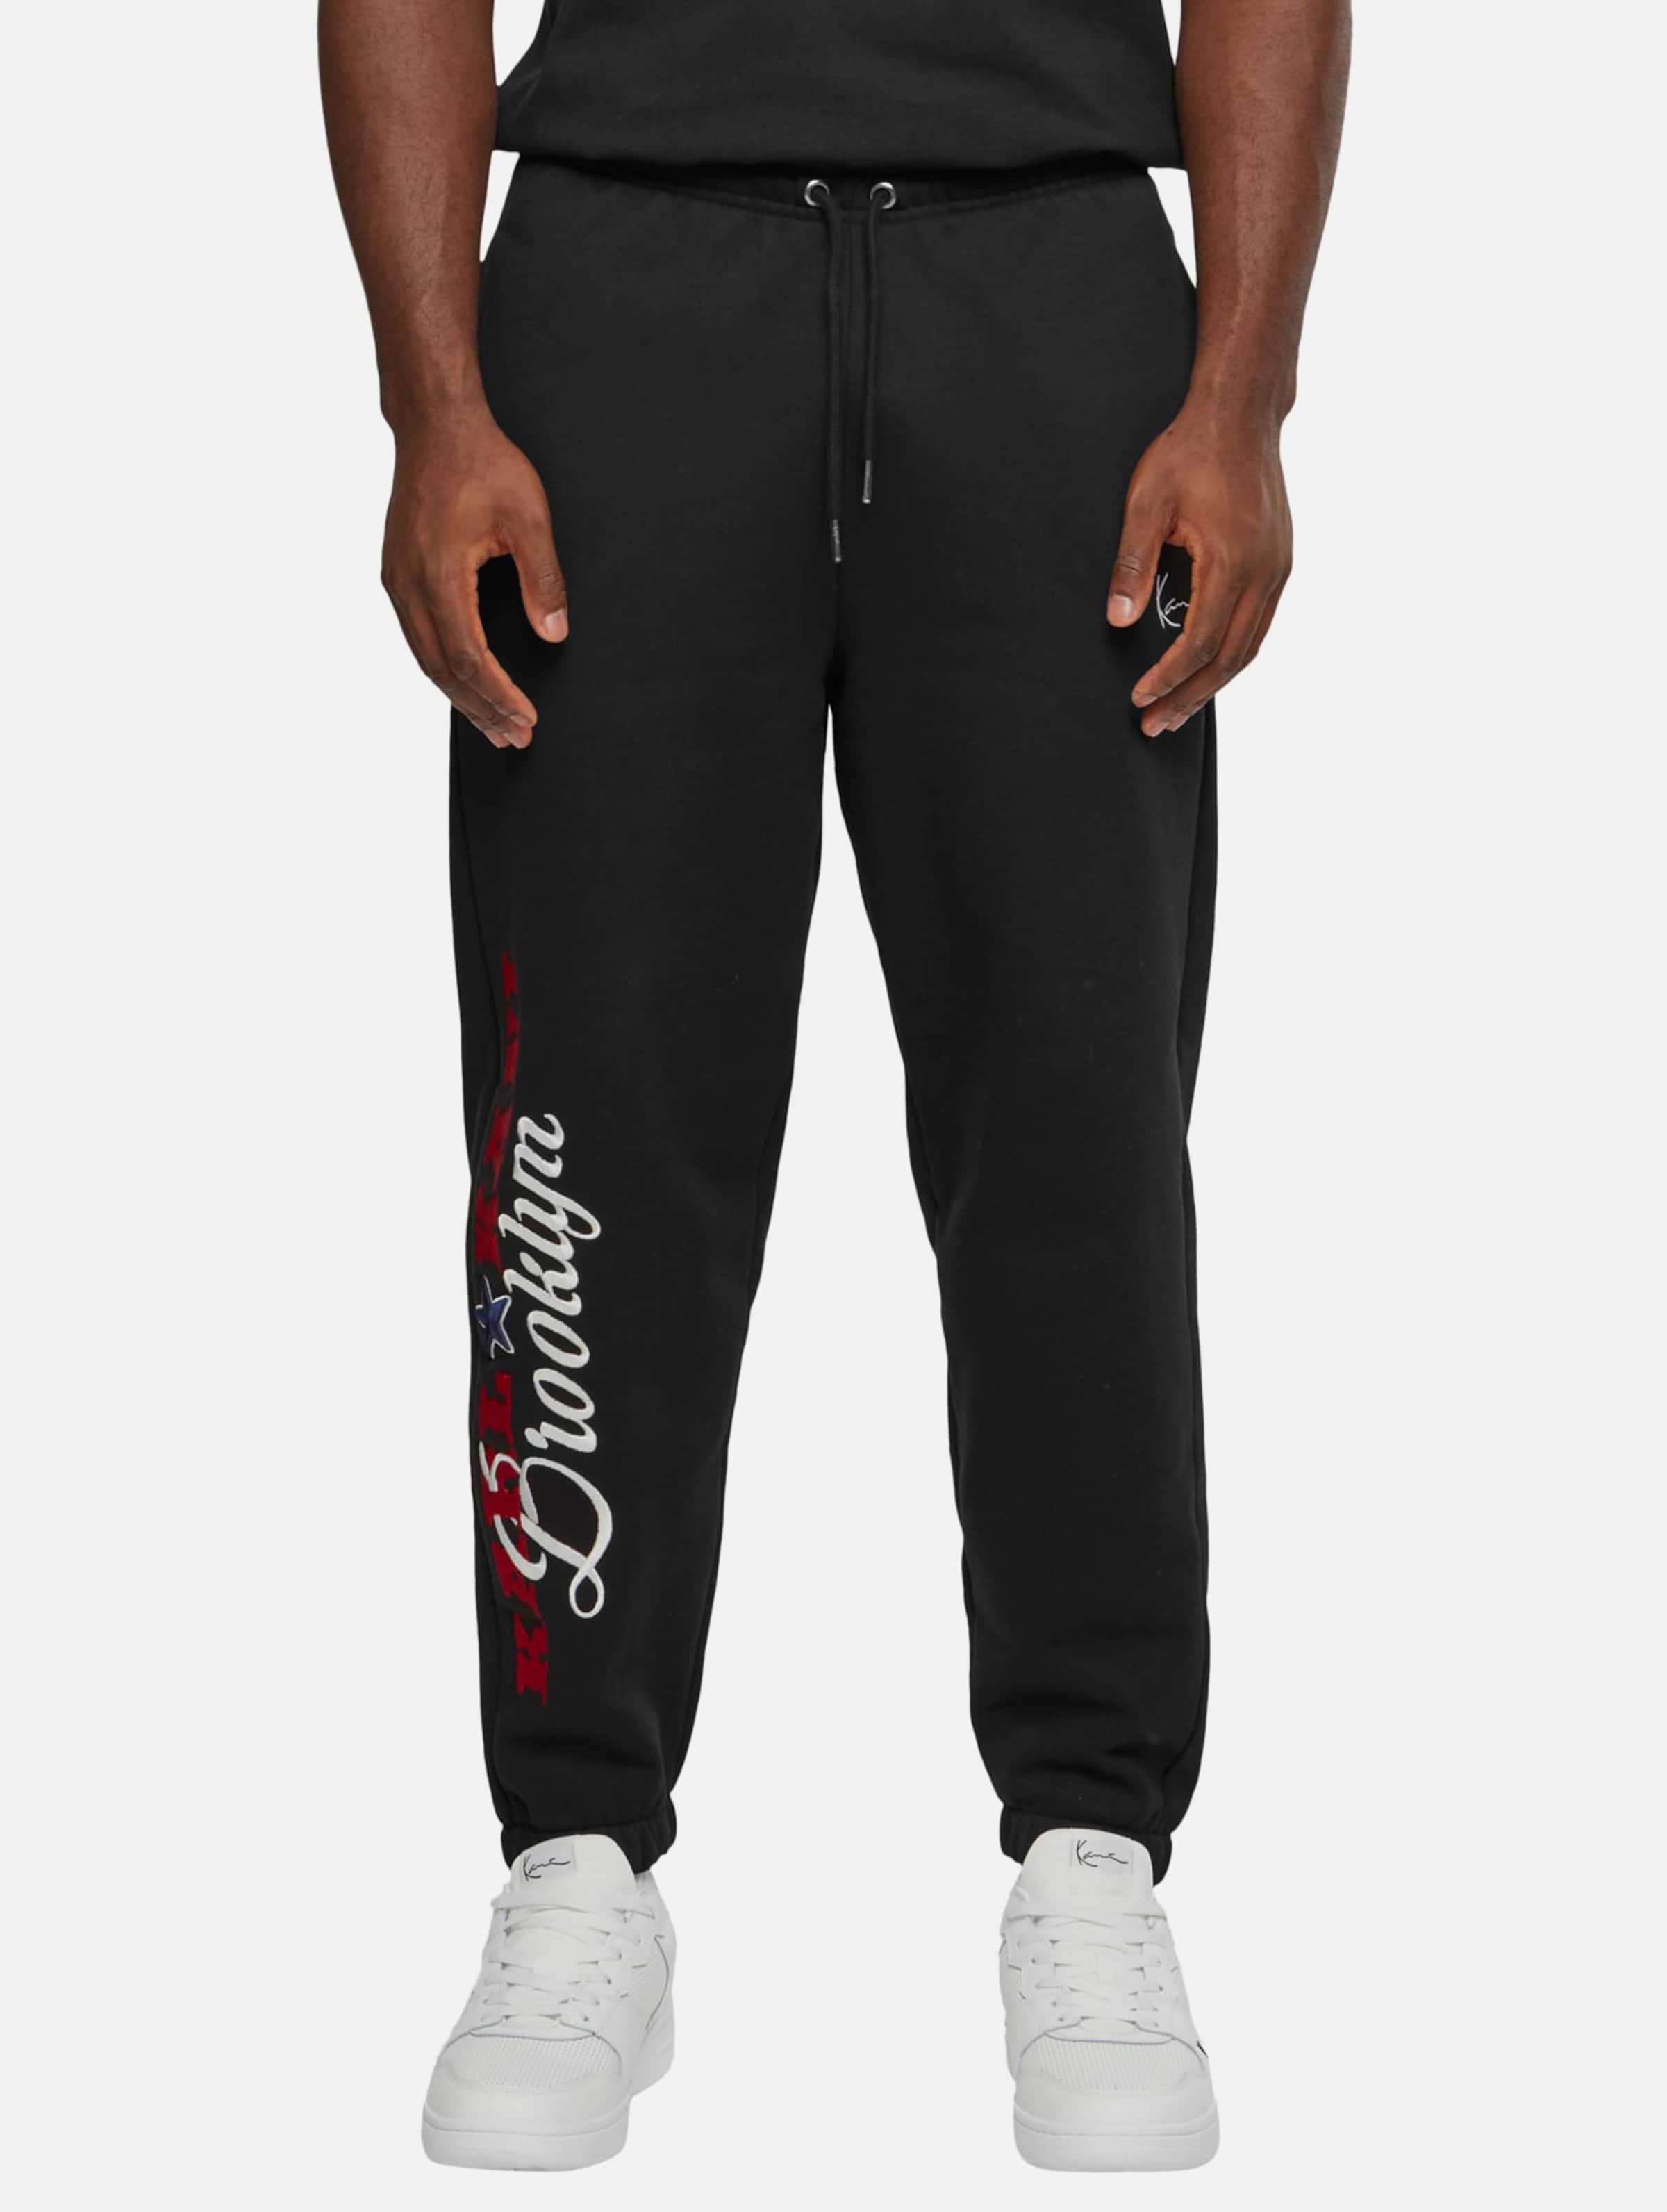 Karl Kani Small Signature Patched Relaxed Fit Cuffed Sweatpants Mannen op kleur zwart, Maat L